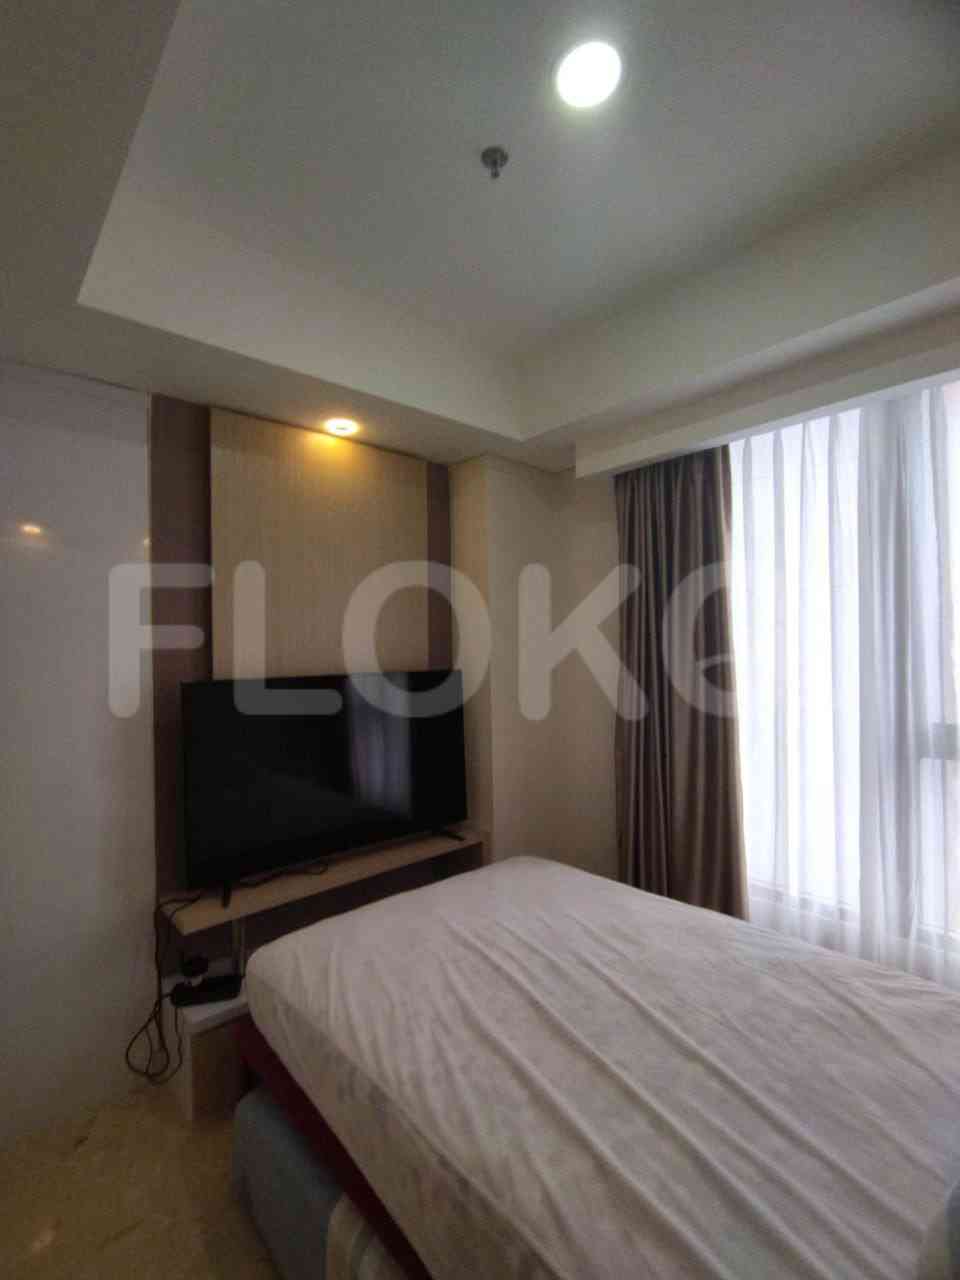 3 Bedroom on 25th Floor for Rent in Gold Coast Apartment - fka8f3 5